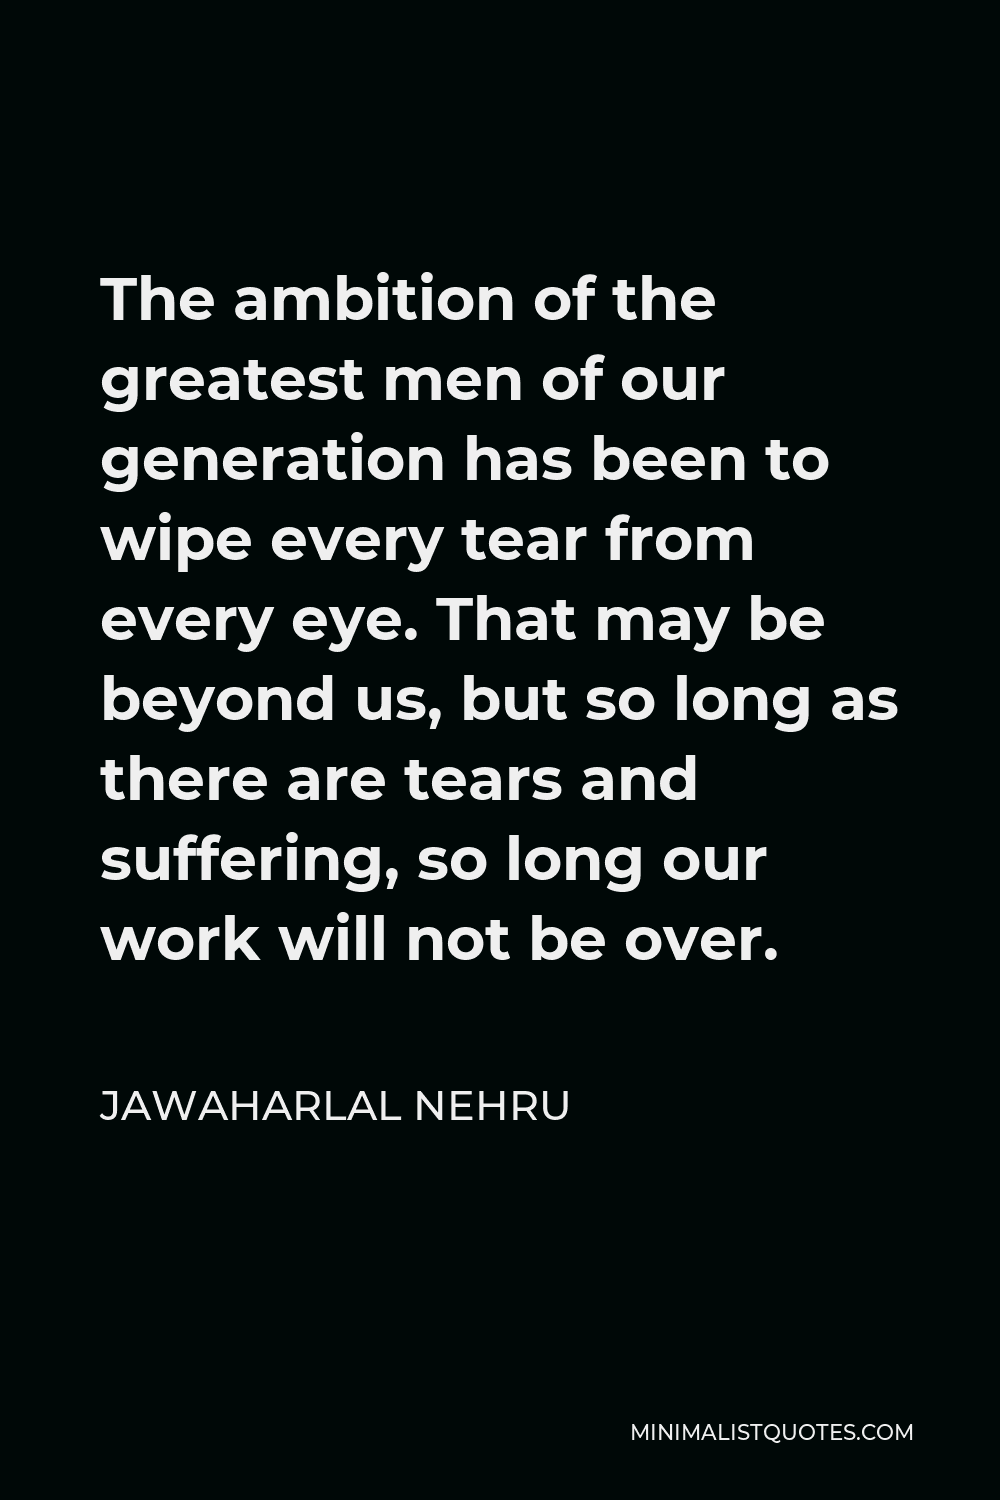 Jawaharlal Nehru Quote - The ambition of the greatest men of our generation has been to wipe every tear from every eye. That may be beyond us, but so long as there are tears and suffering, so long our work will not be over.